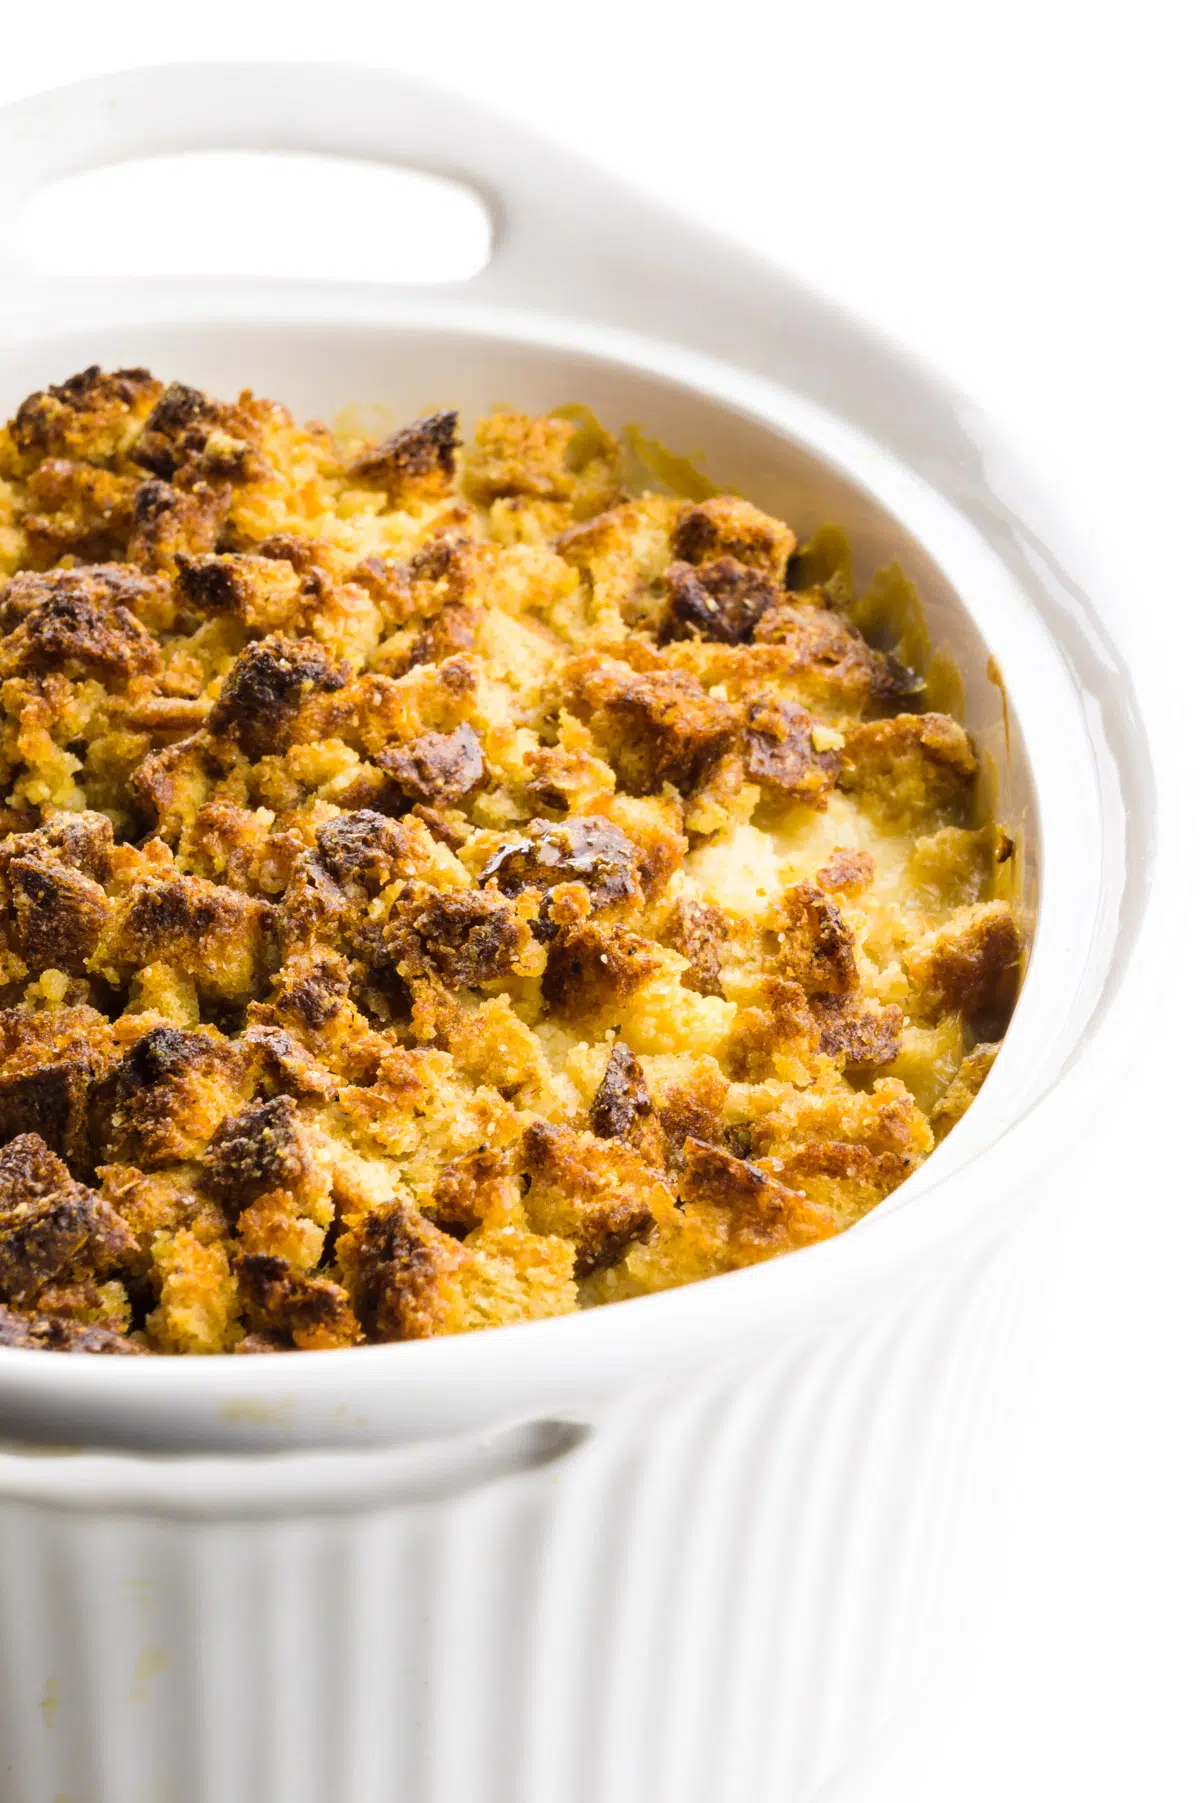 A casserole dish is full of freshly baked cauliflower gratin with a browned bread crumbled topping.